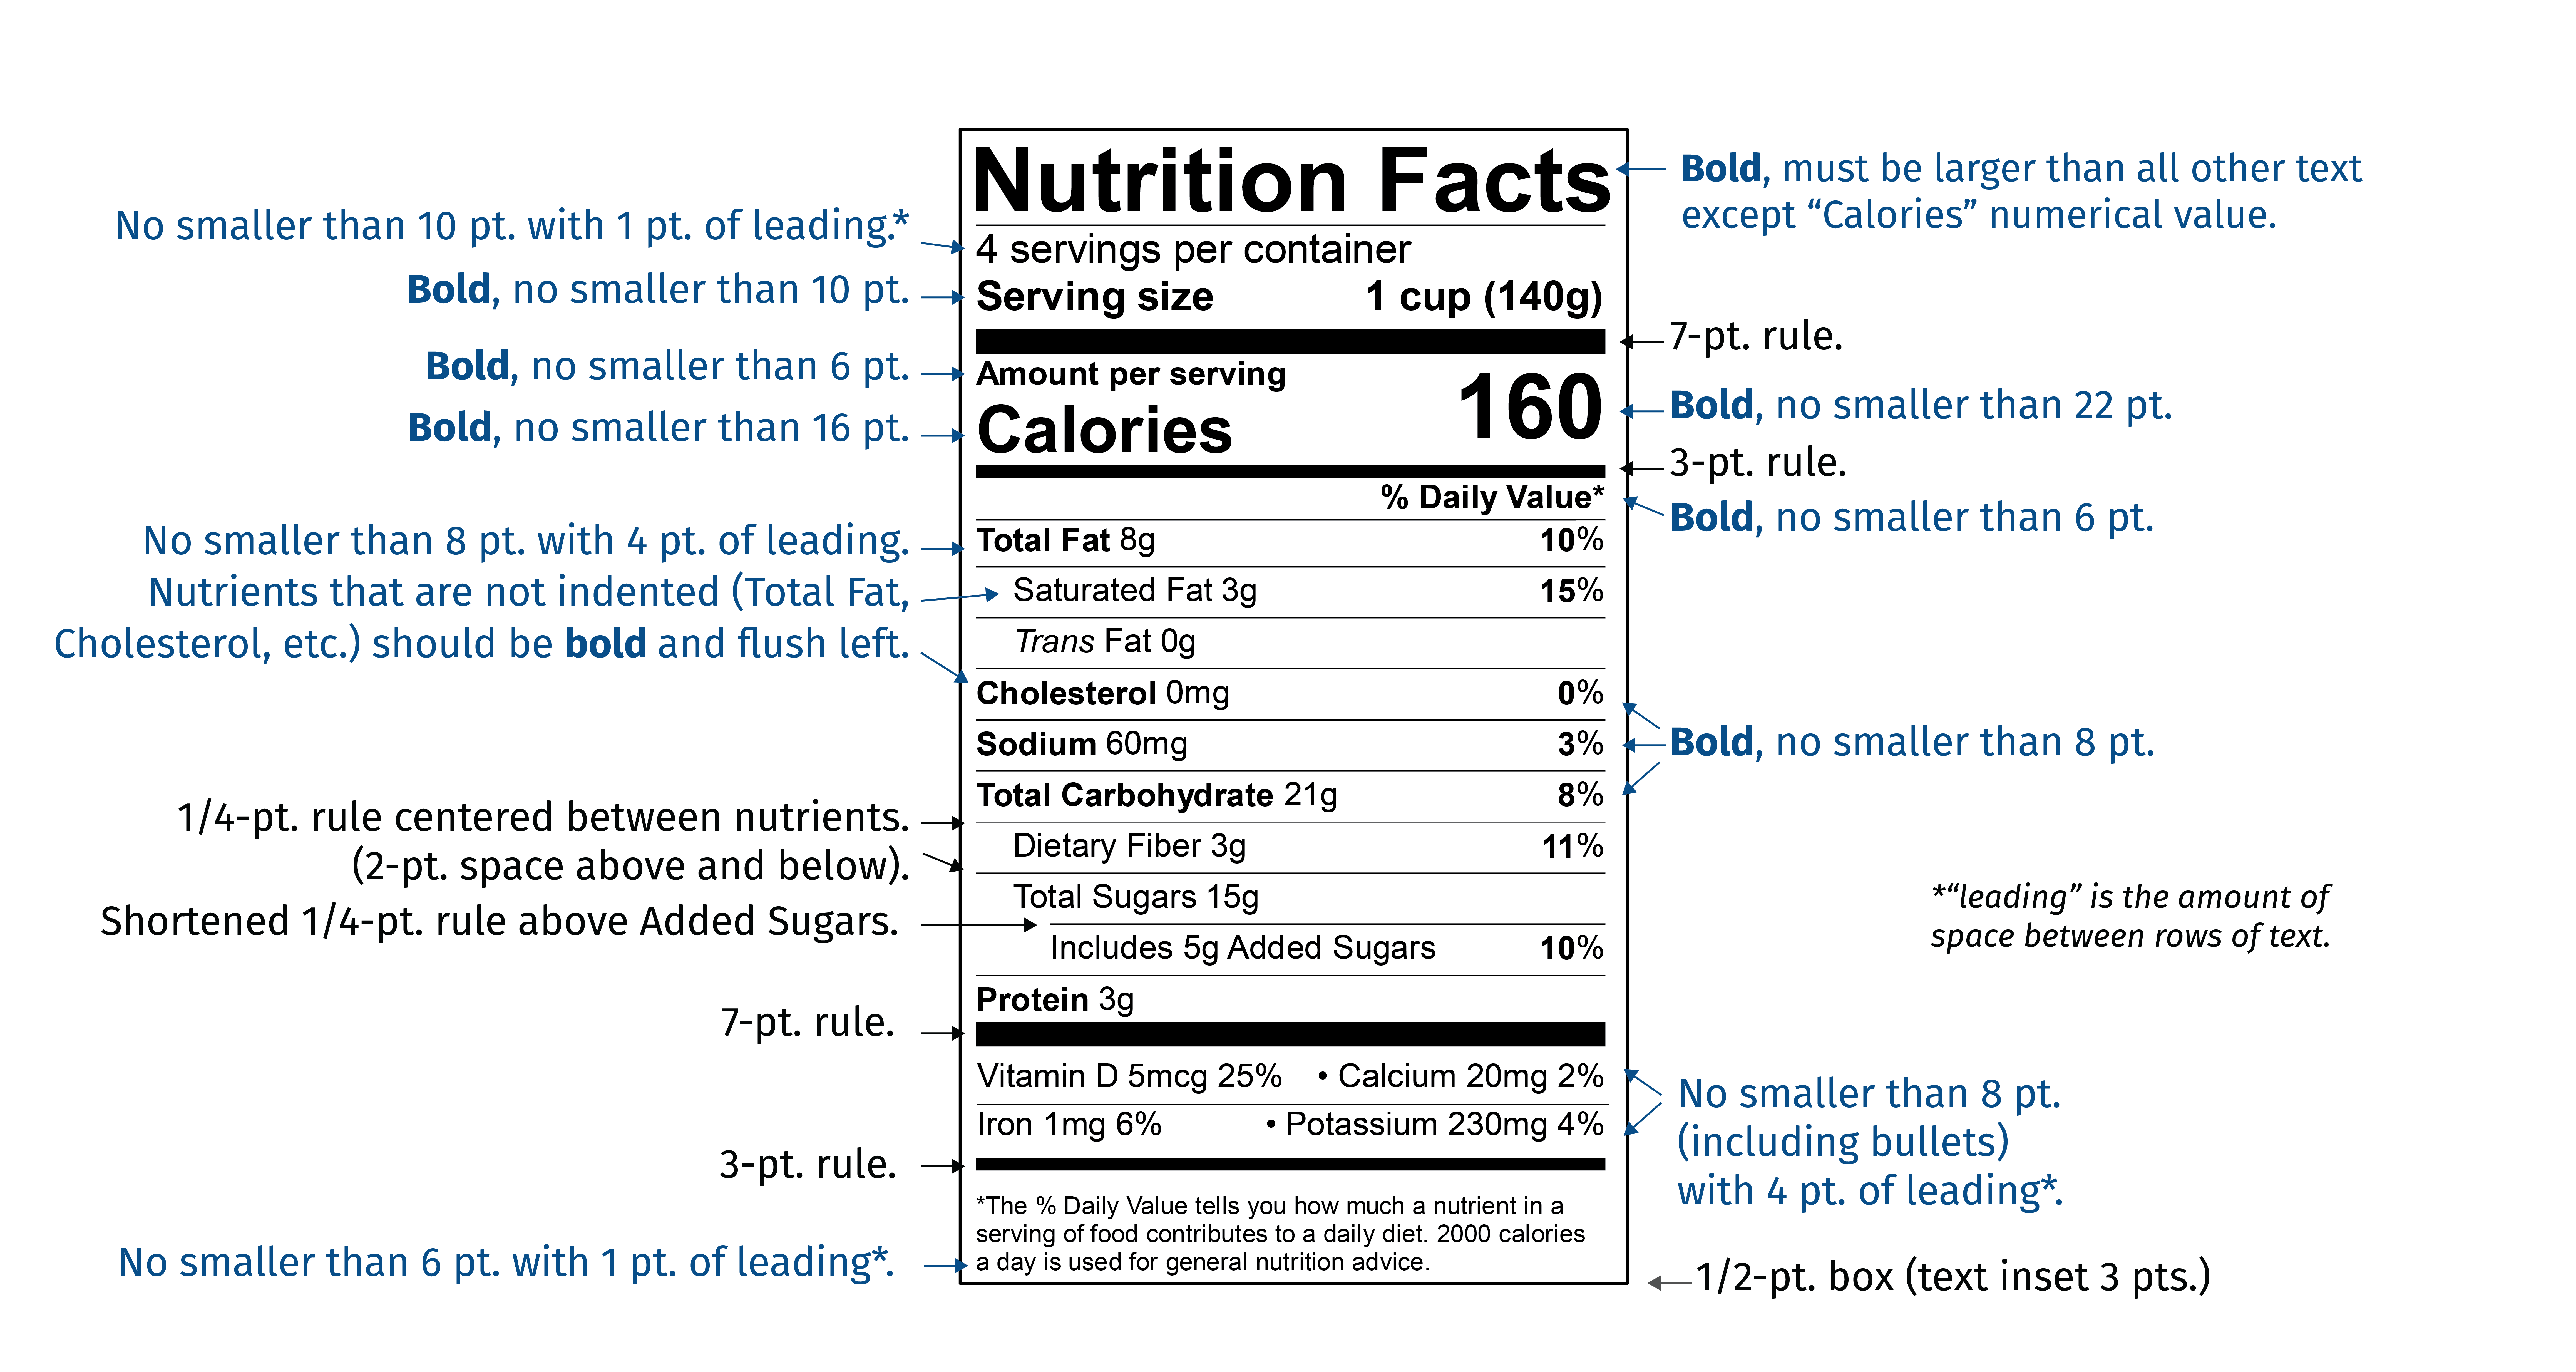 New FDA Nutrition Facts Label Font Style and Size | ESHA ...